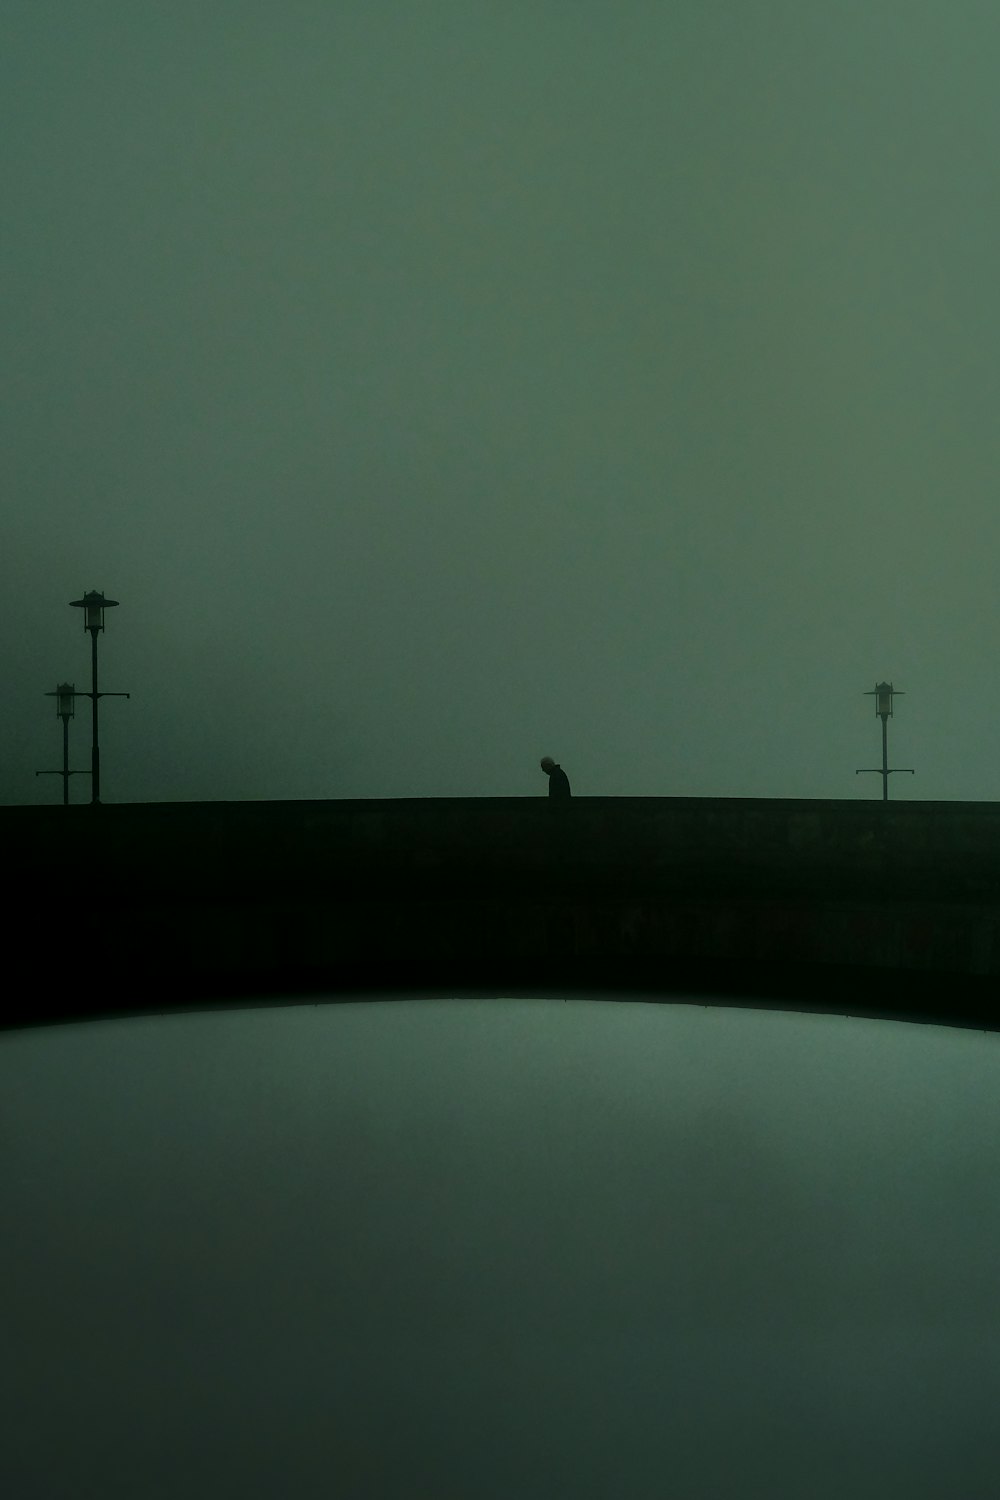 silhouette of person standing on bridge